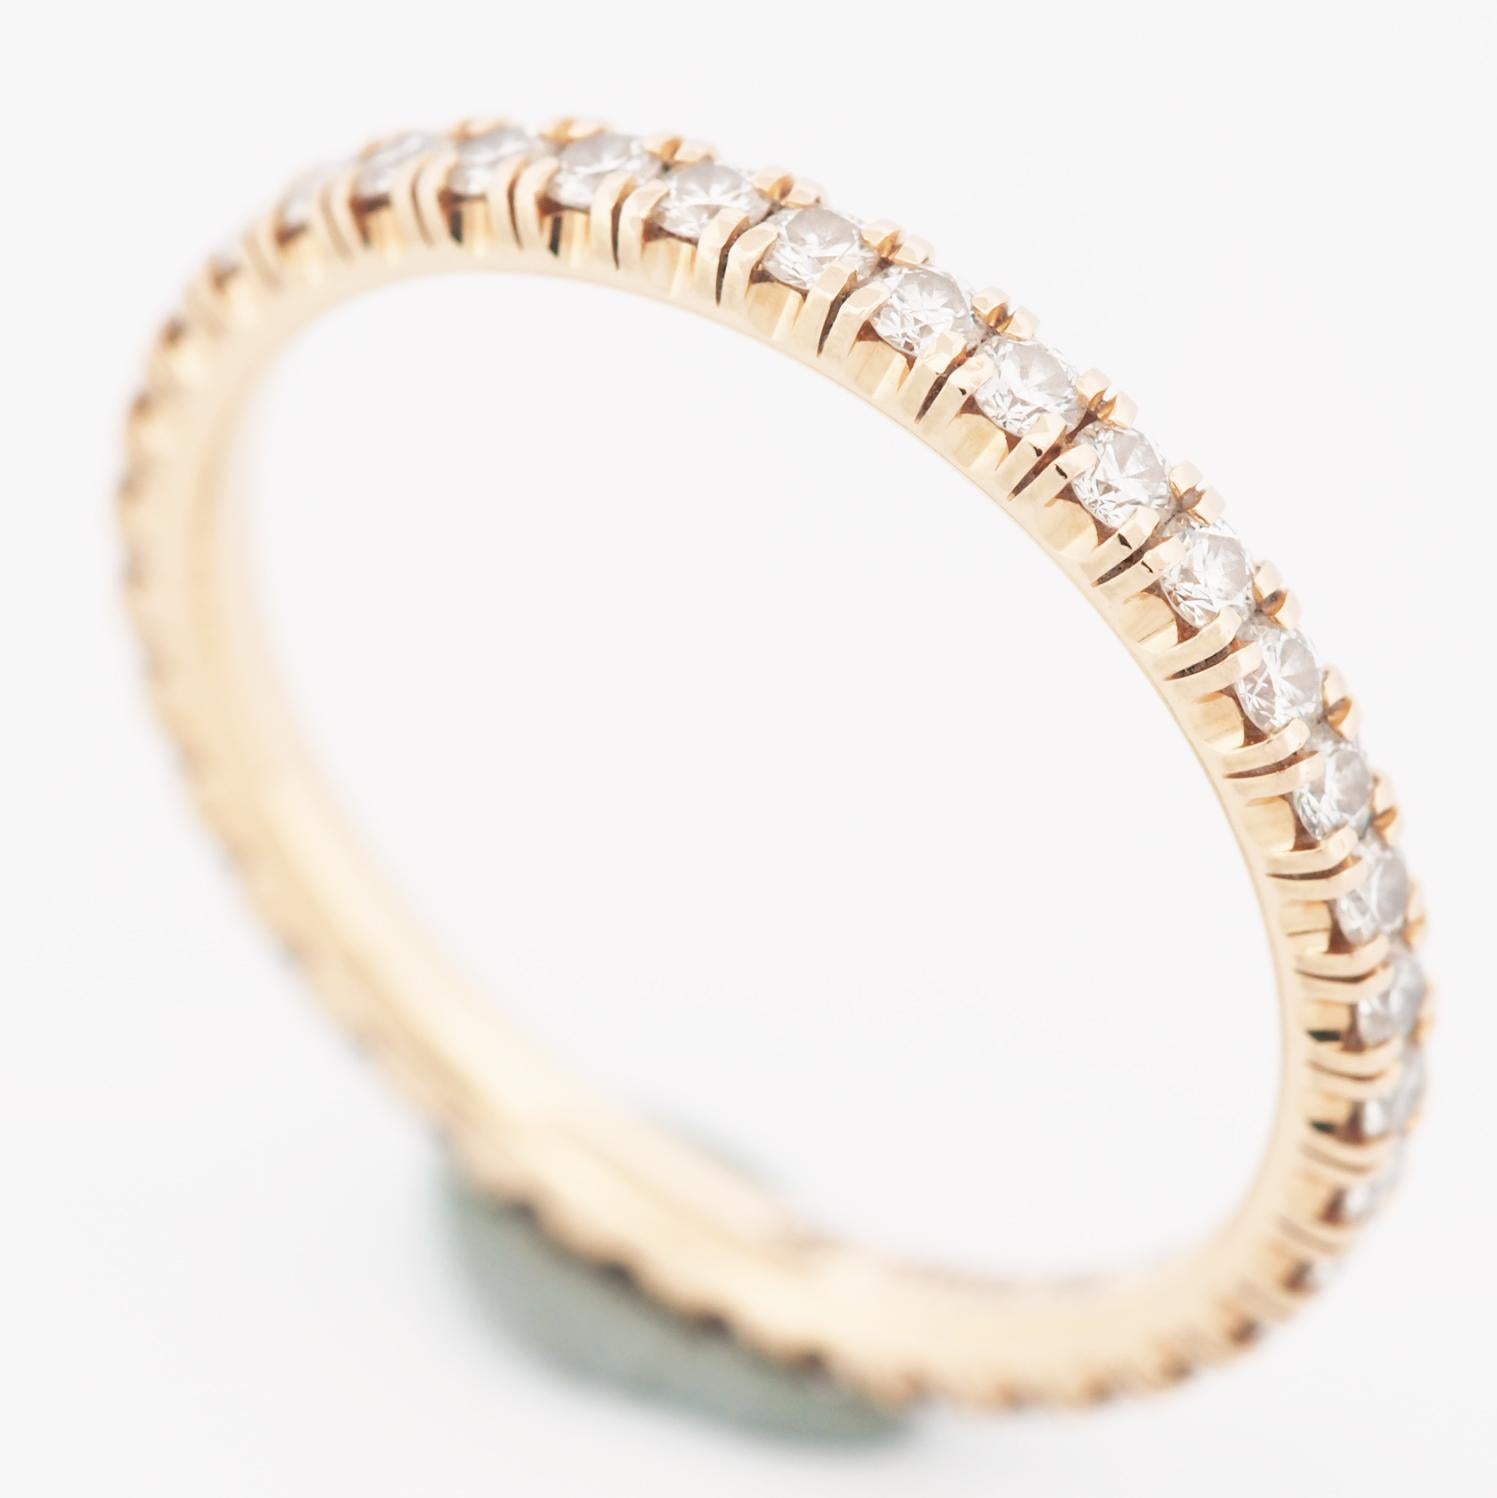 Item: Authentic Cartier Etincelle Eternity Diamonds Ring
Stones: Diamond ( 0.47ct )
Metal: 18K Rose Gold
Ring Size: 50 US SIZE 5.0 UK SIZE J 1/2
Internal Diameter: 15.80 mm
Measurement: 2.0 mm width
Weight: 1.6 Grams
Condition: Used